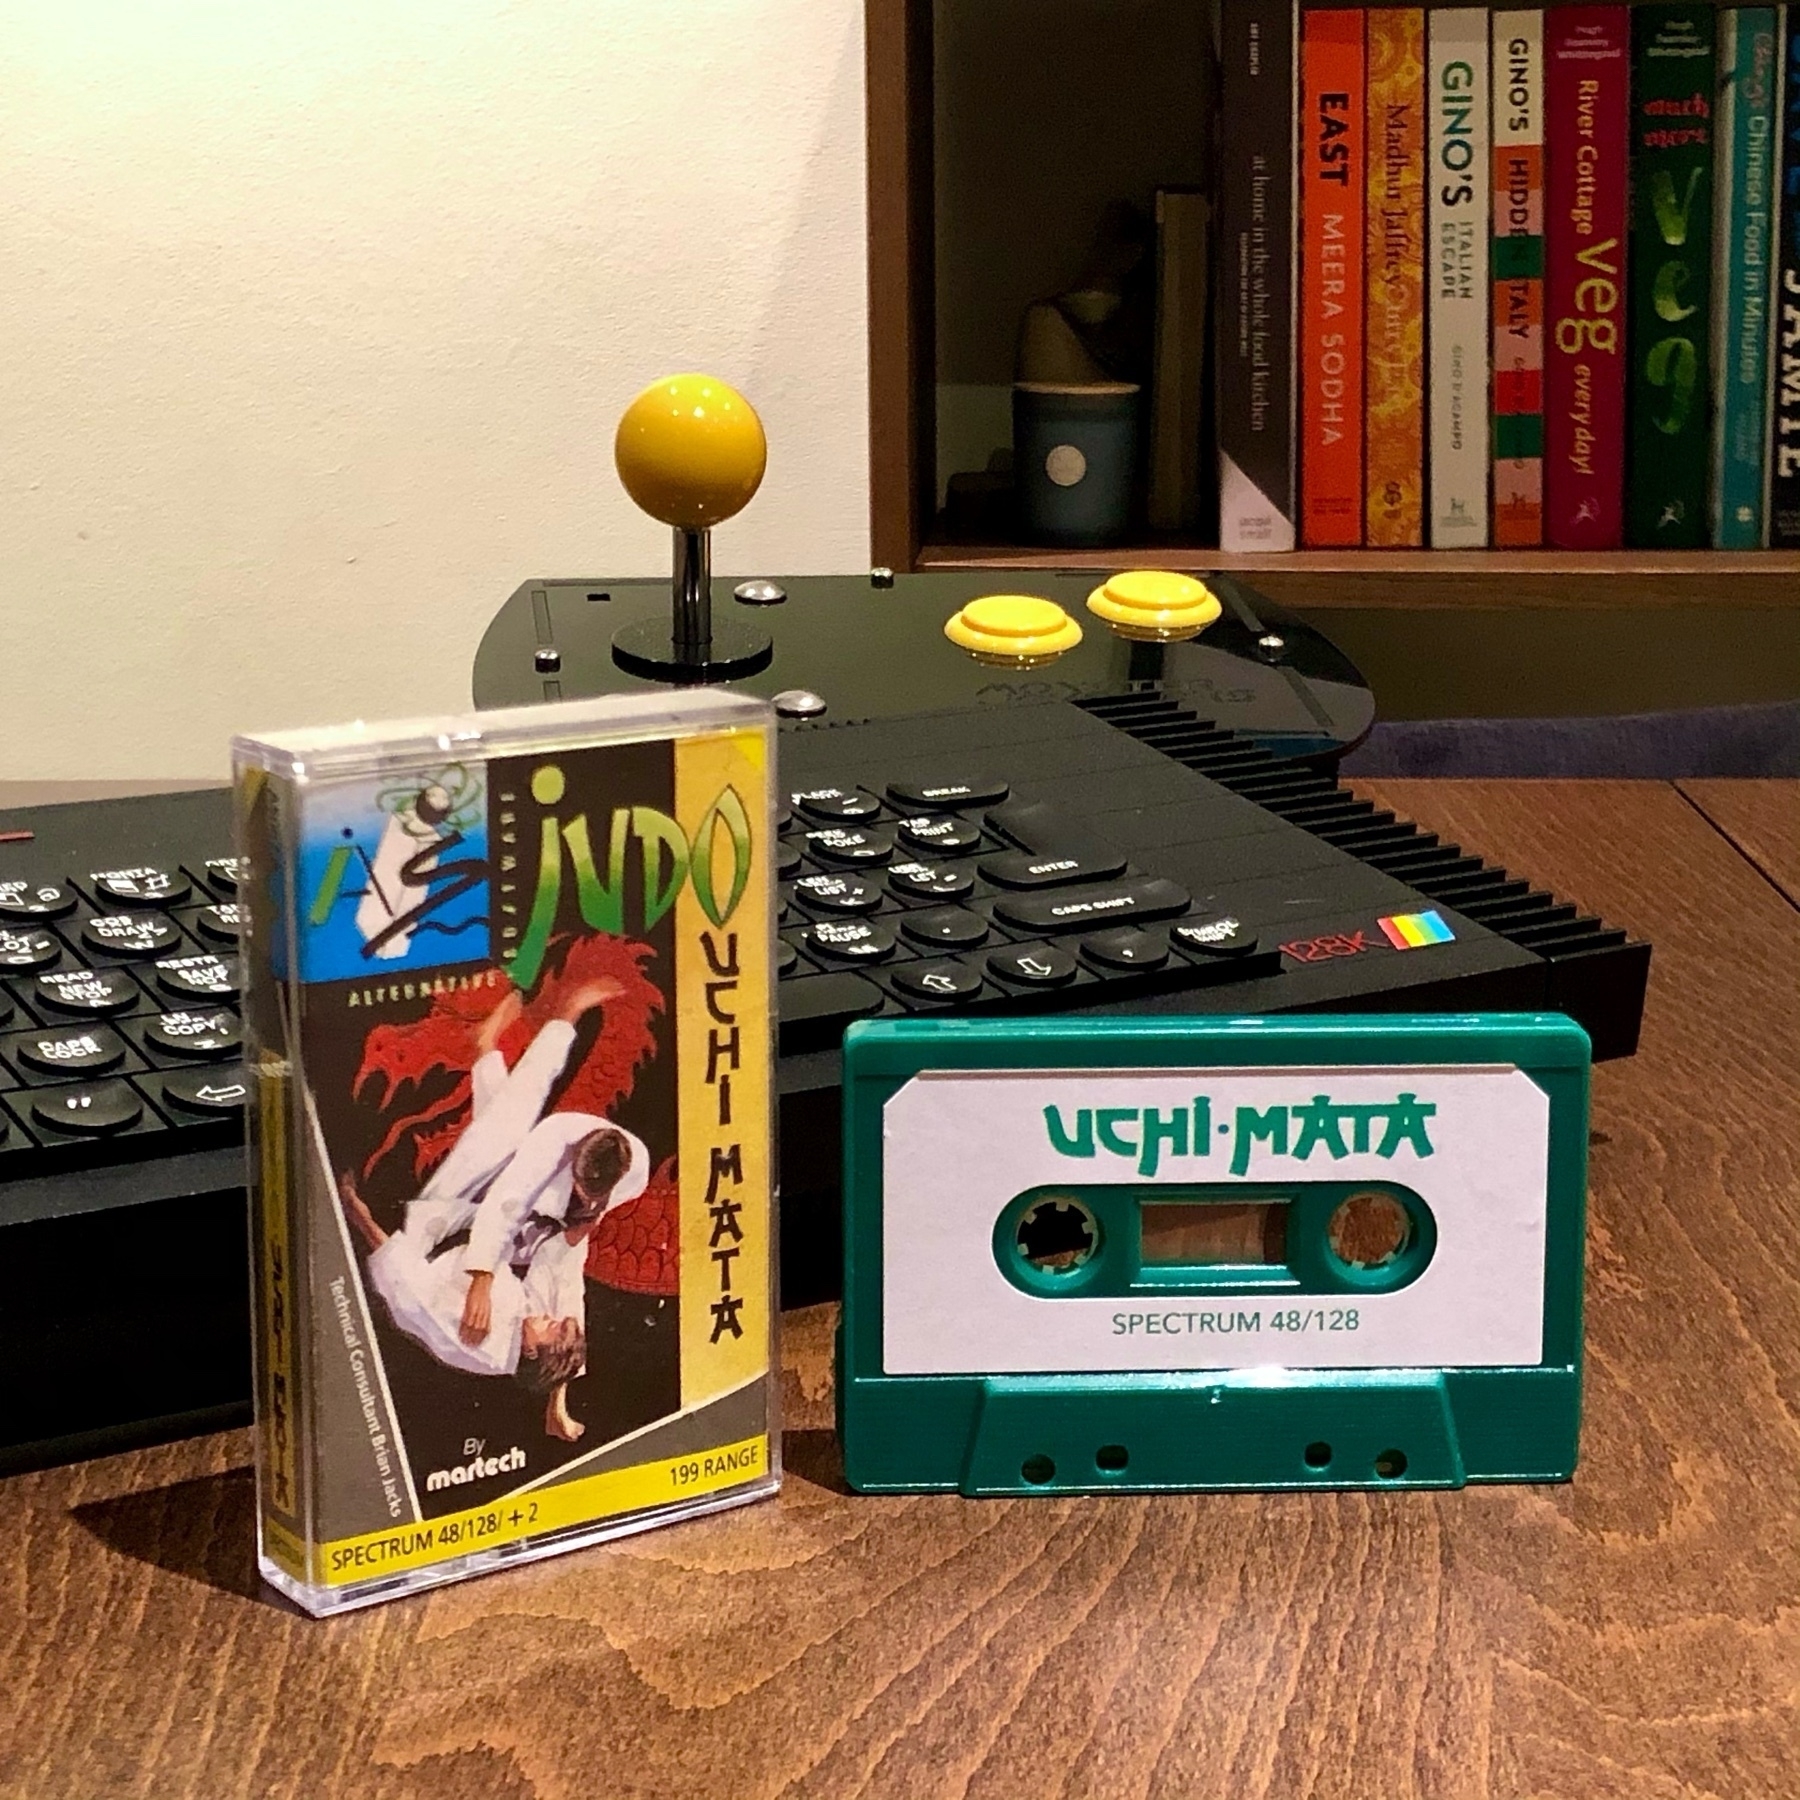 original cassette case and inlay card with new cassette featuring a printed label